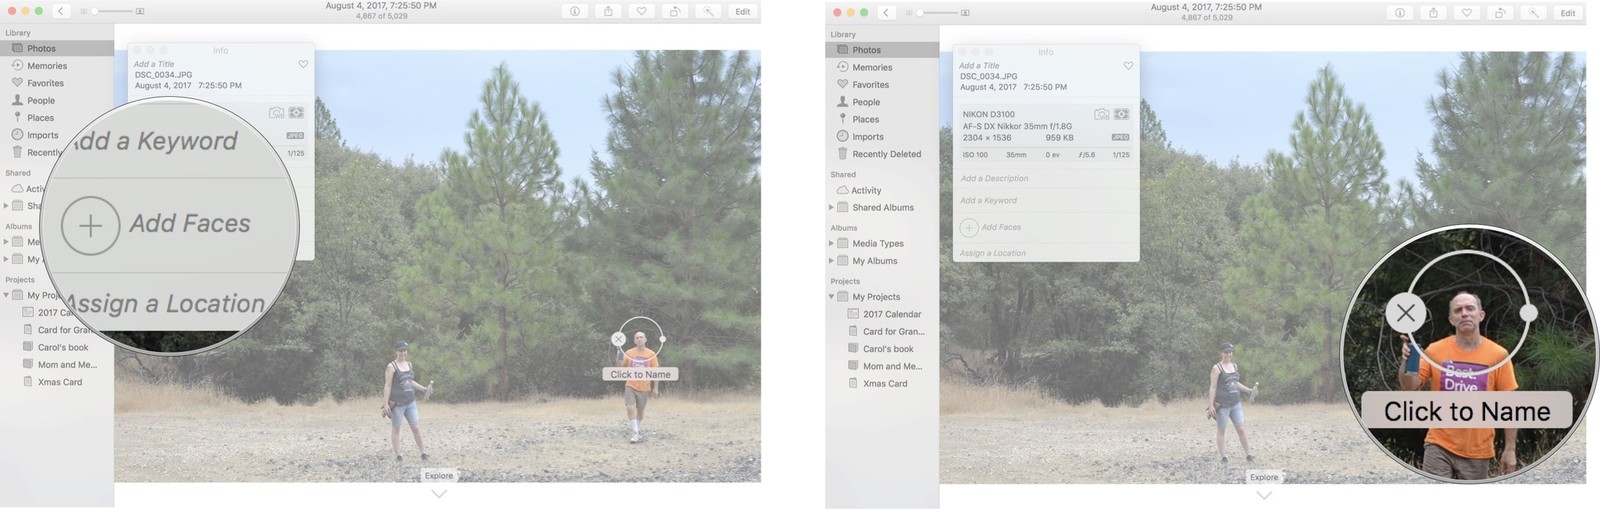 manually add photos in the photo app for mac user photo